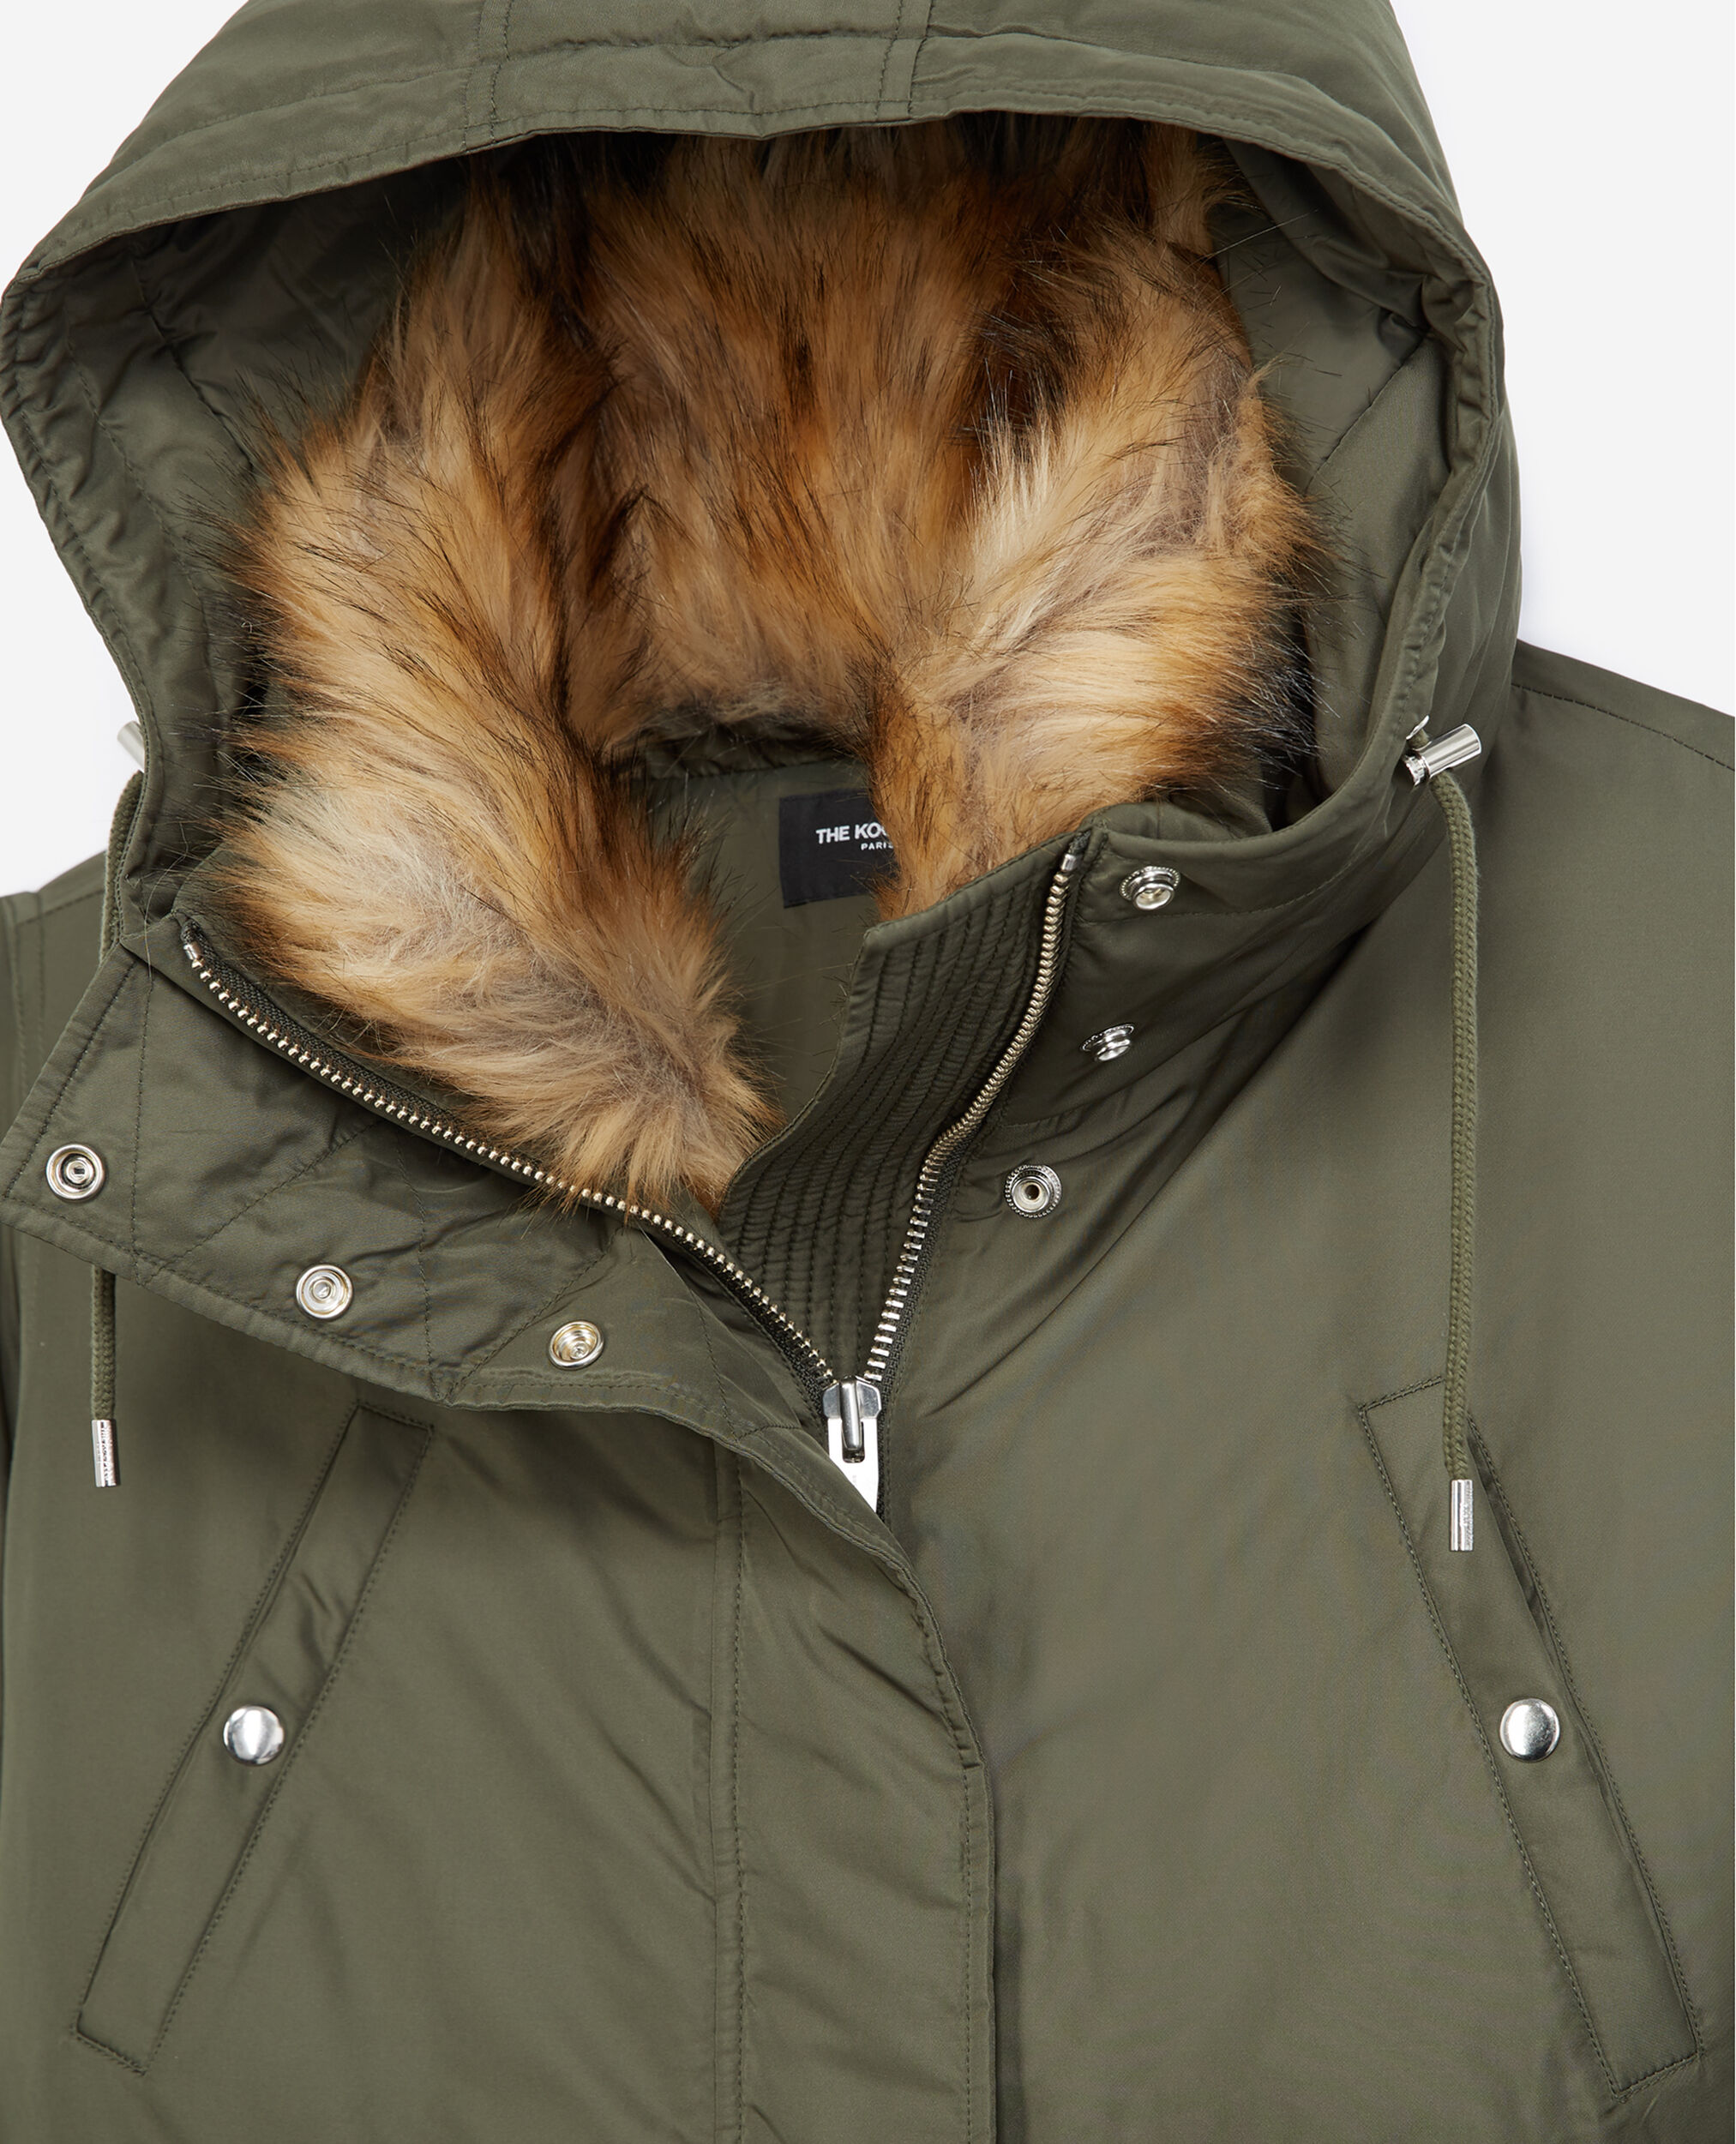 Hooded parka with faux fur in green, KAKI, hi-res image number null